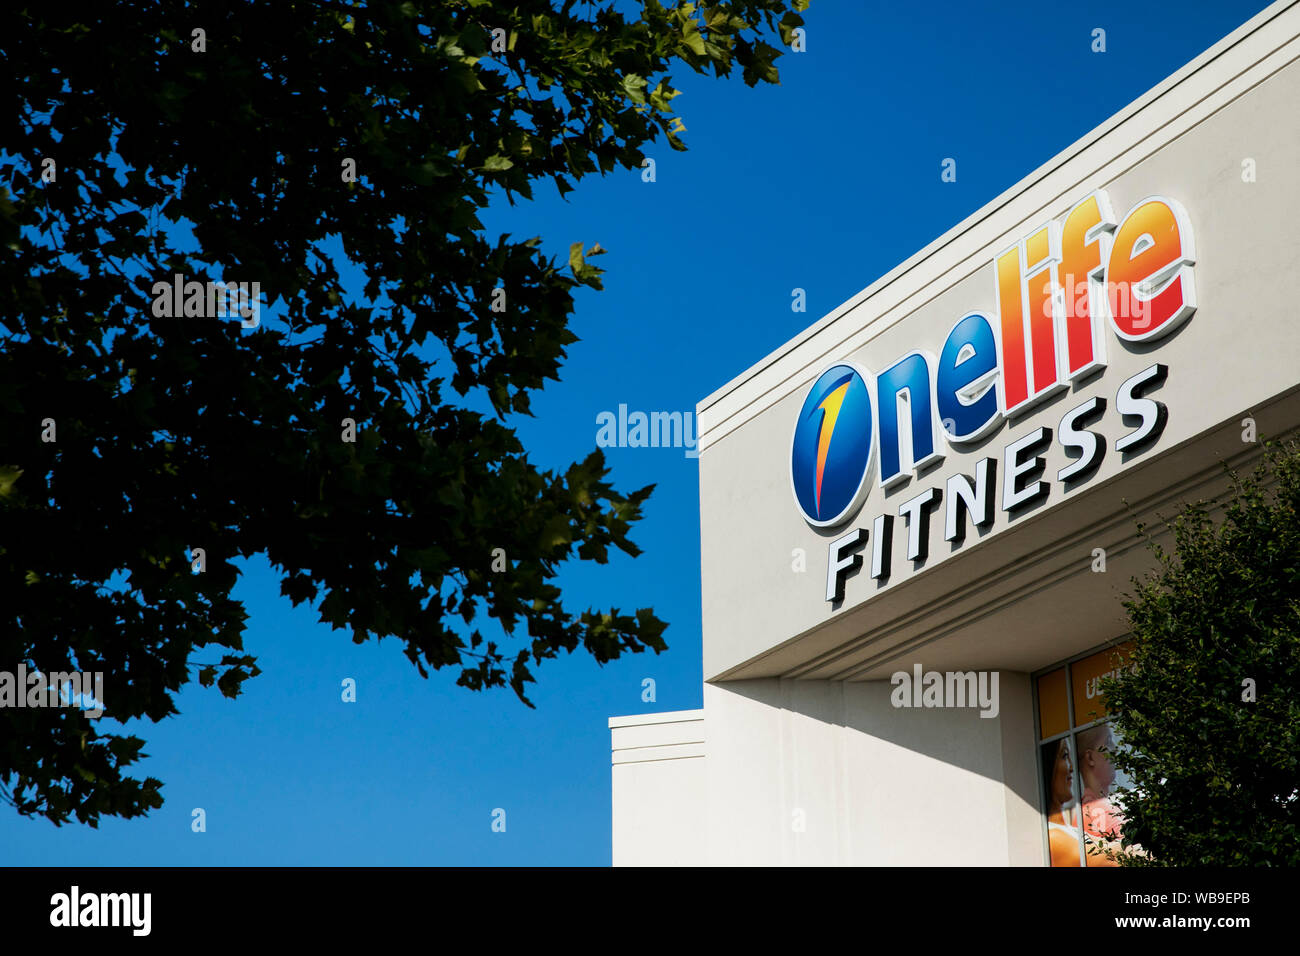 A logo sign outside of a Onelife Fitness location in Hagerstown, Maryland on August 8, 2019. Stock Photo